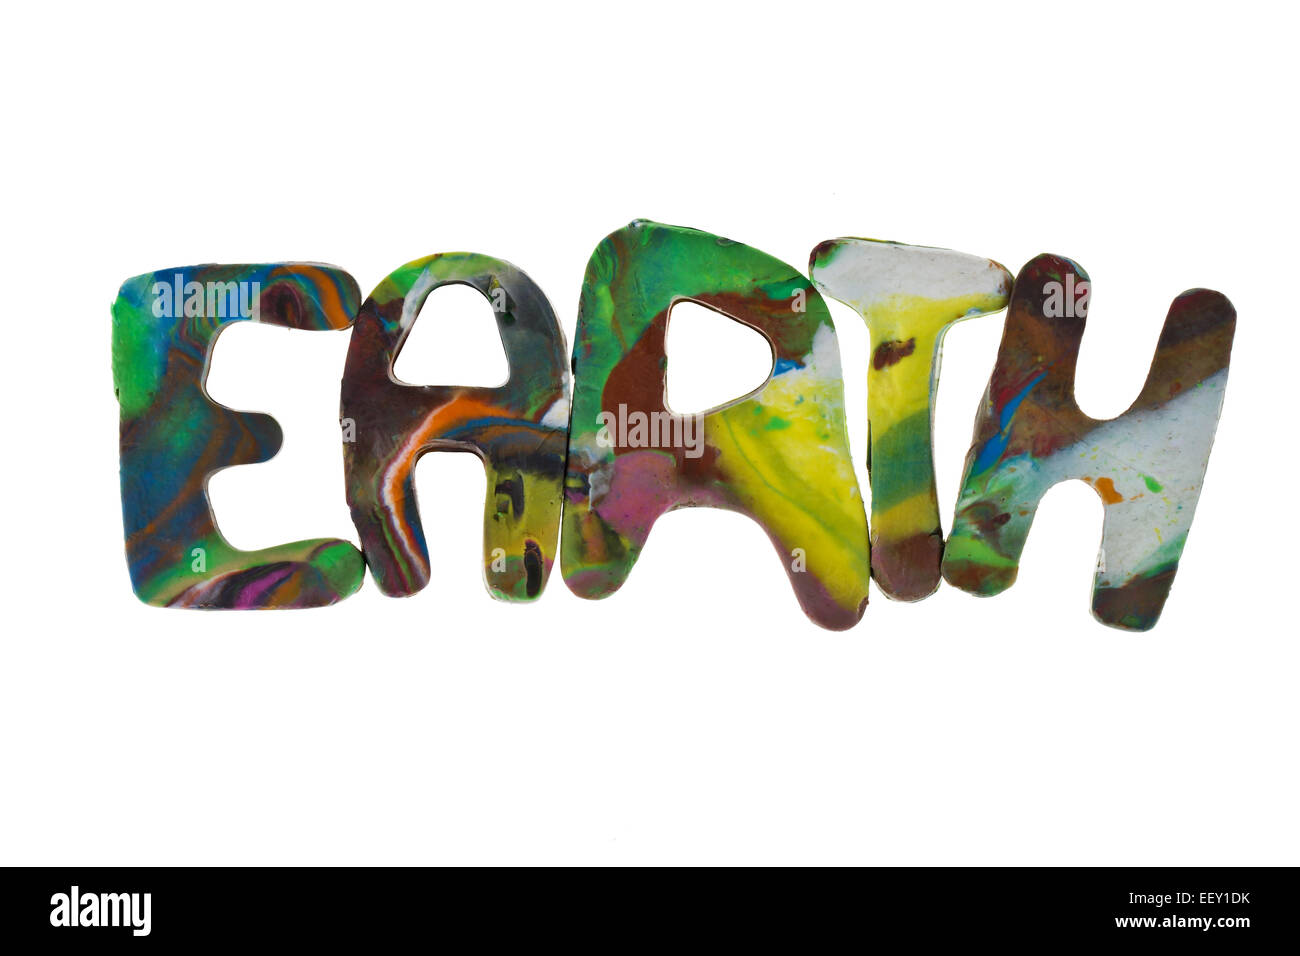 Plasticine letters forming word Earth written on white background Stock Photo